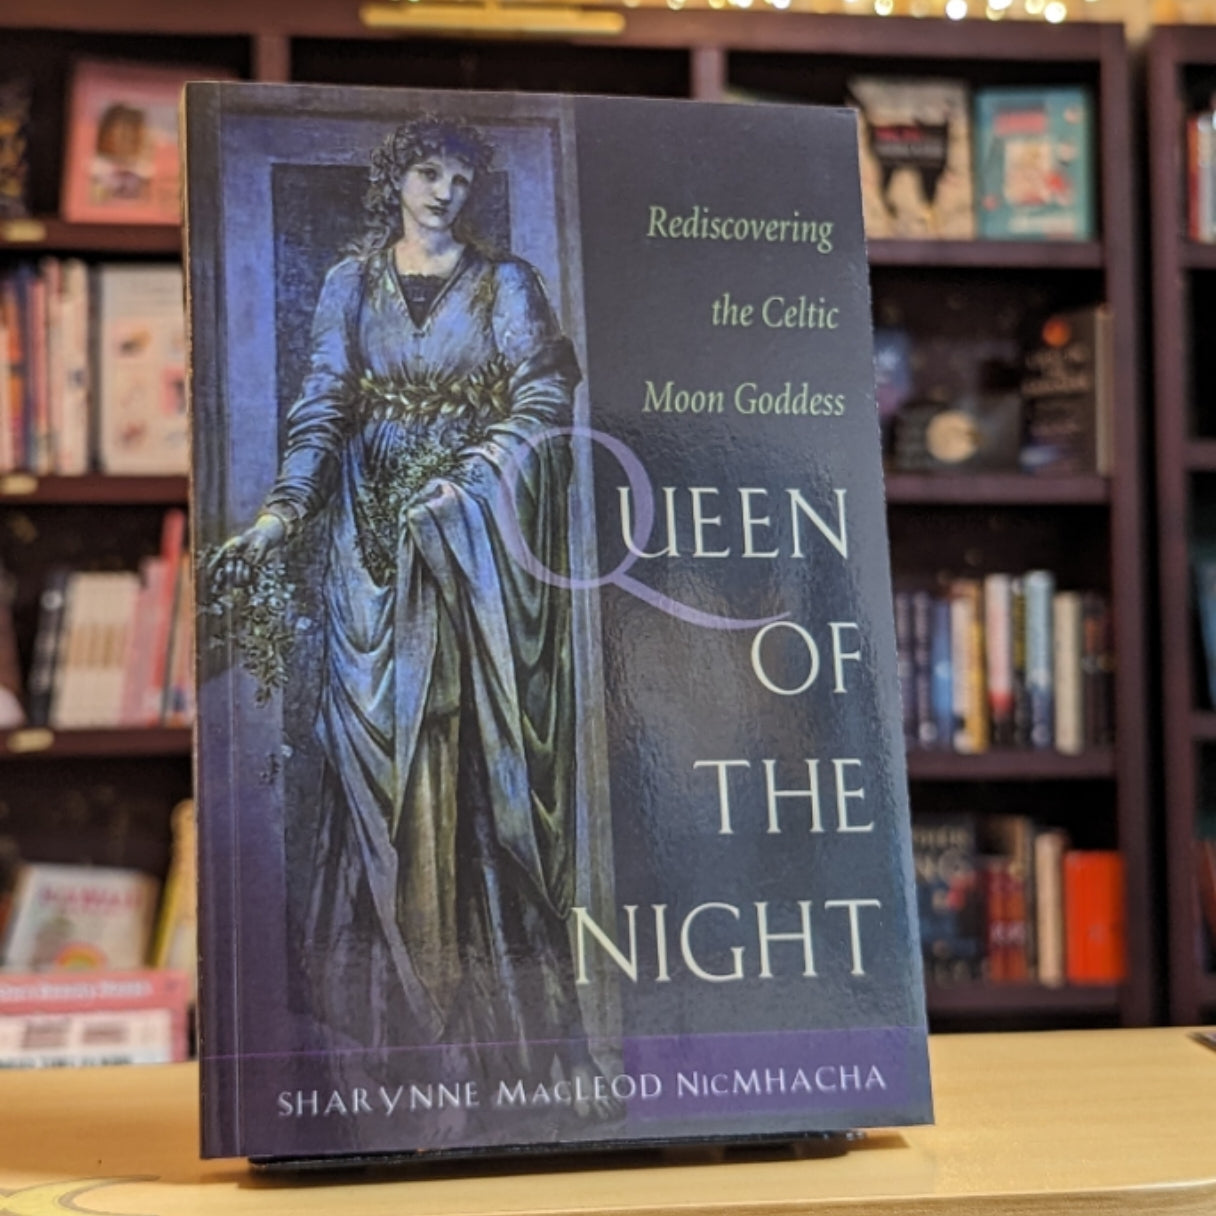 Queen of the Night: Rediscovering the Celtic Moon Goddess